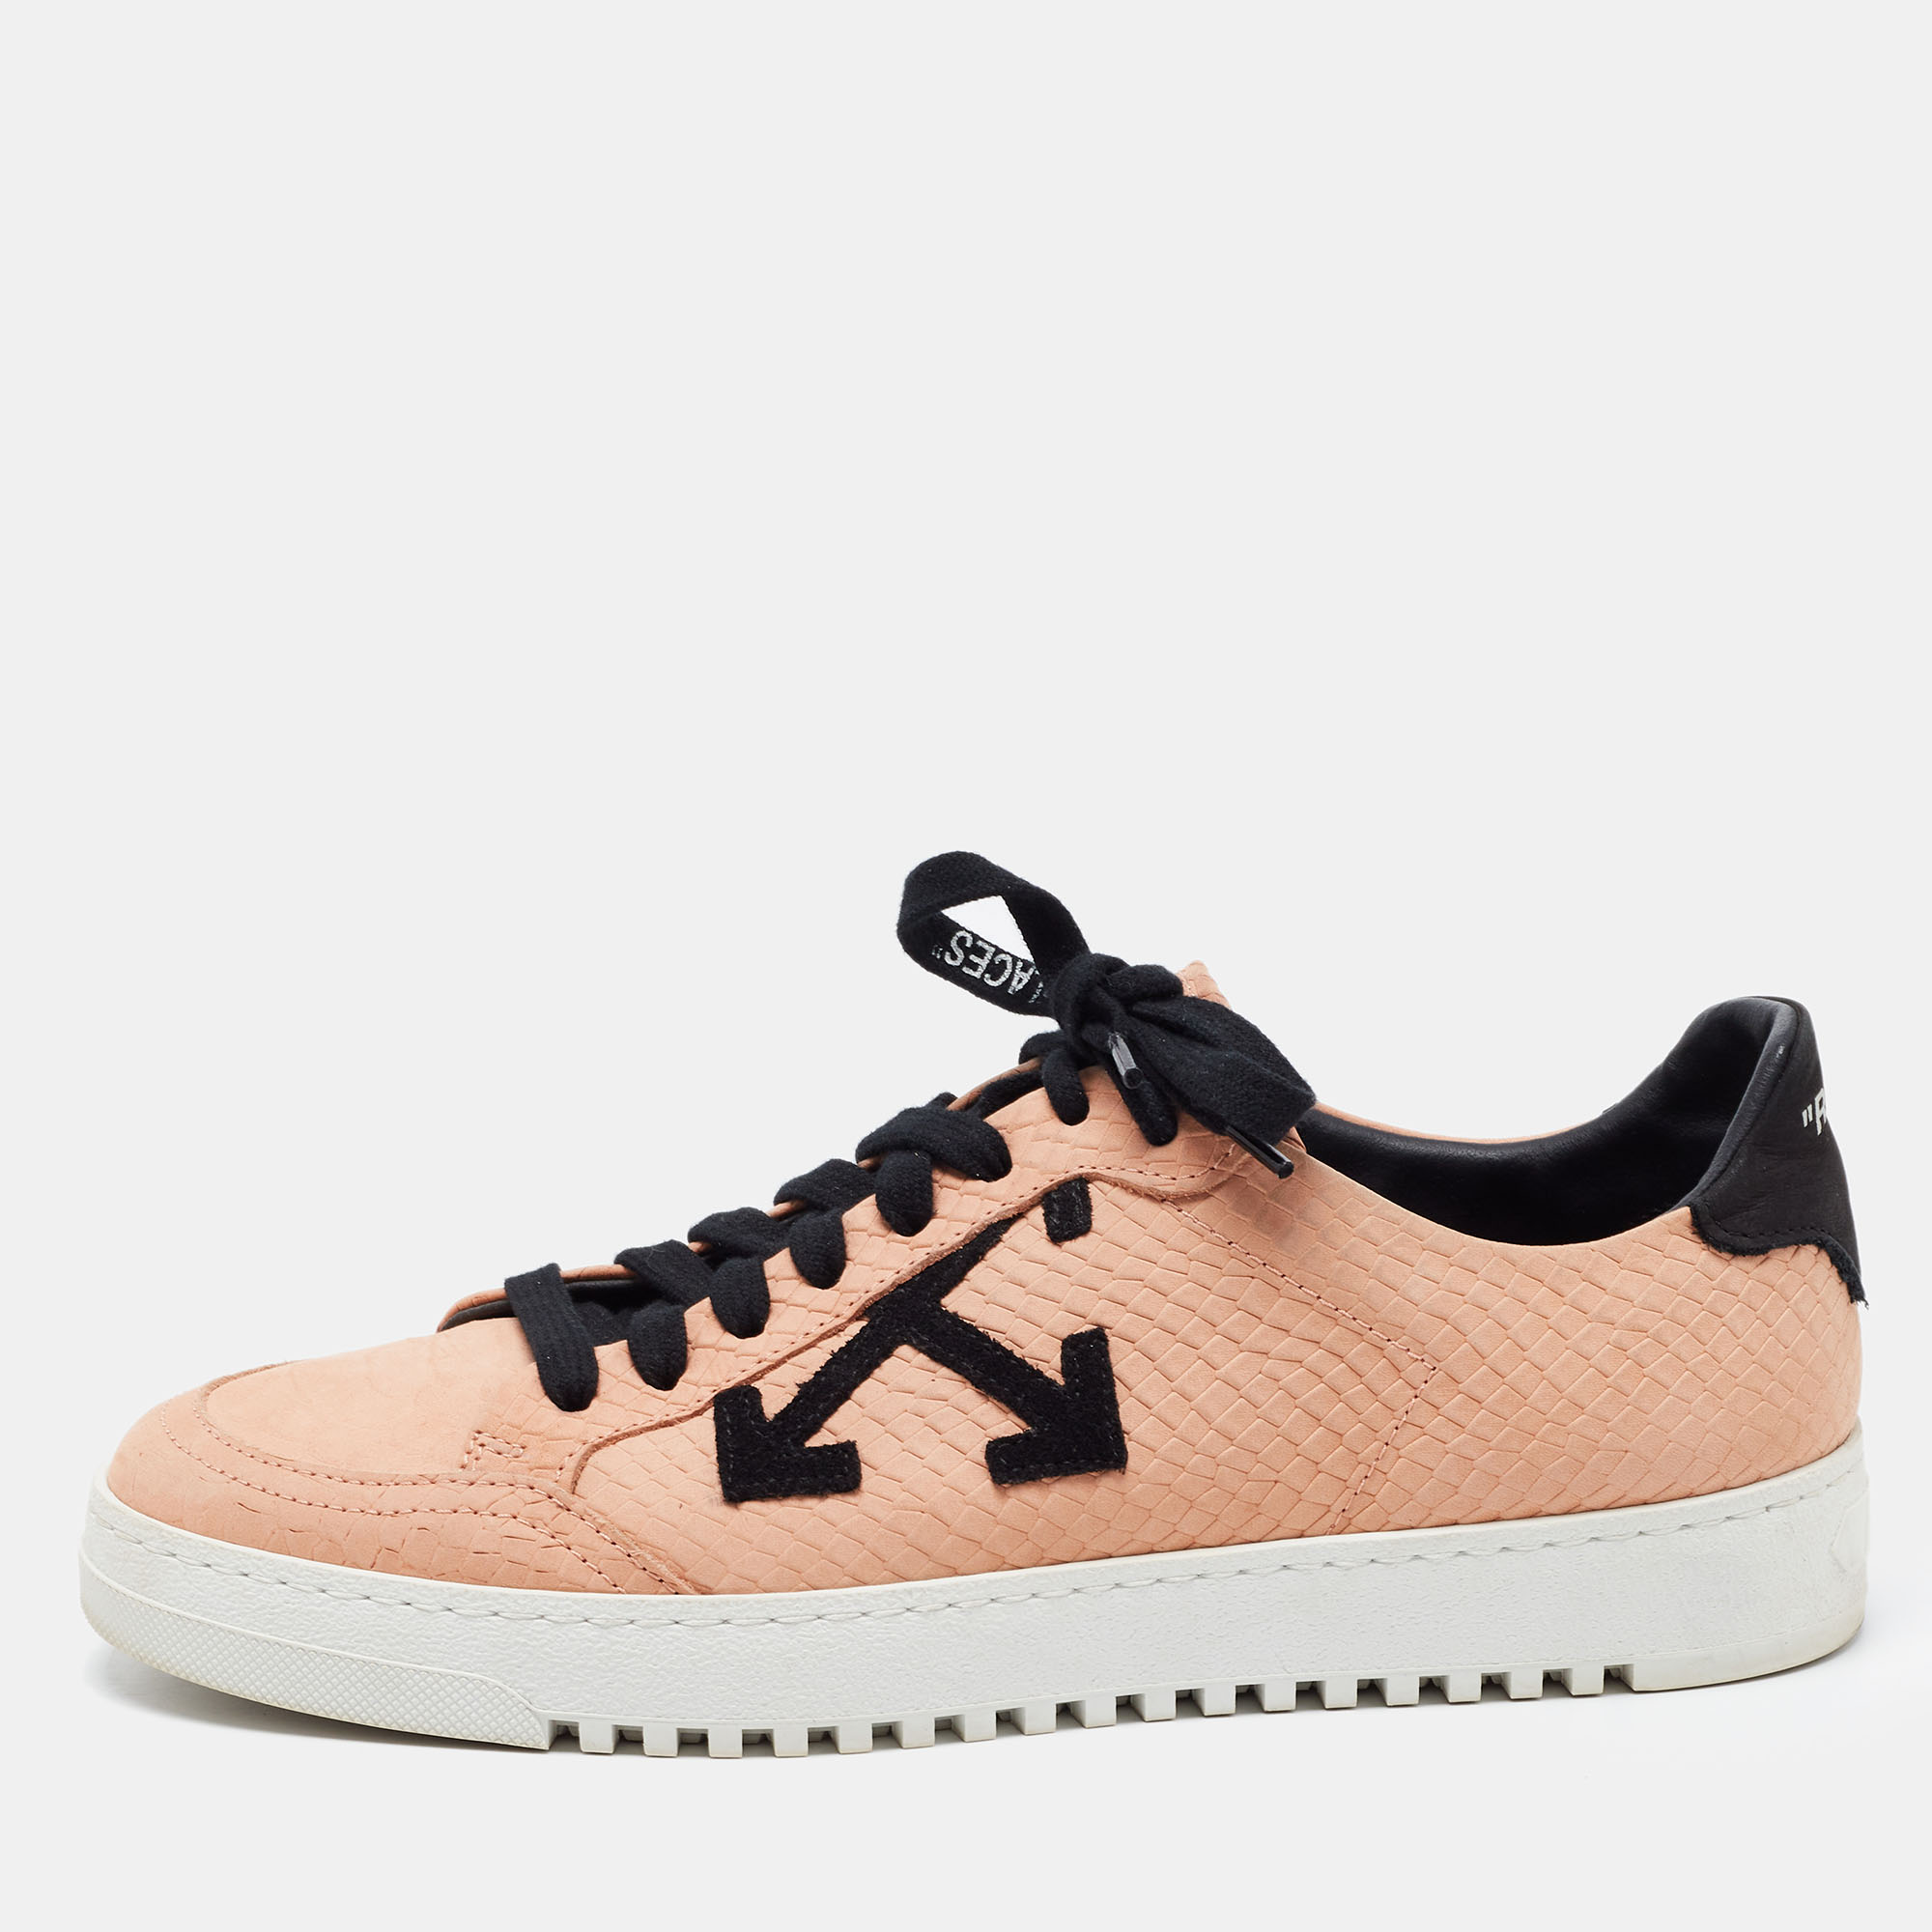 Off-White Pink Python Embossed Leather Low 2.0 Sneakers Size 39